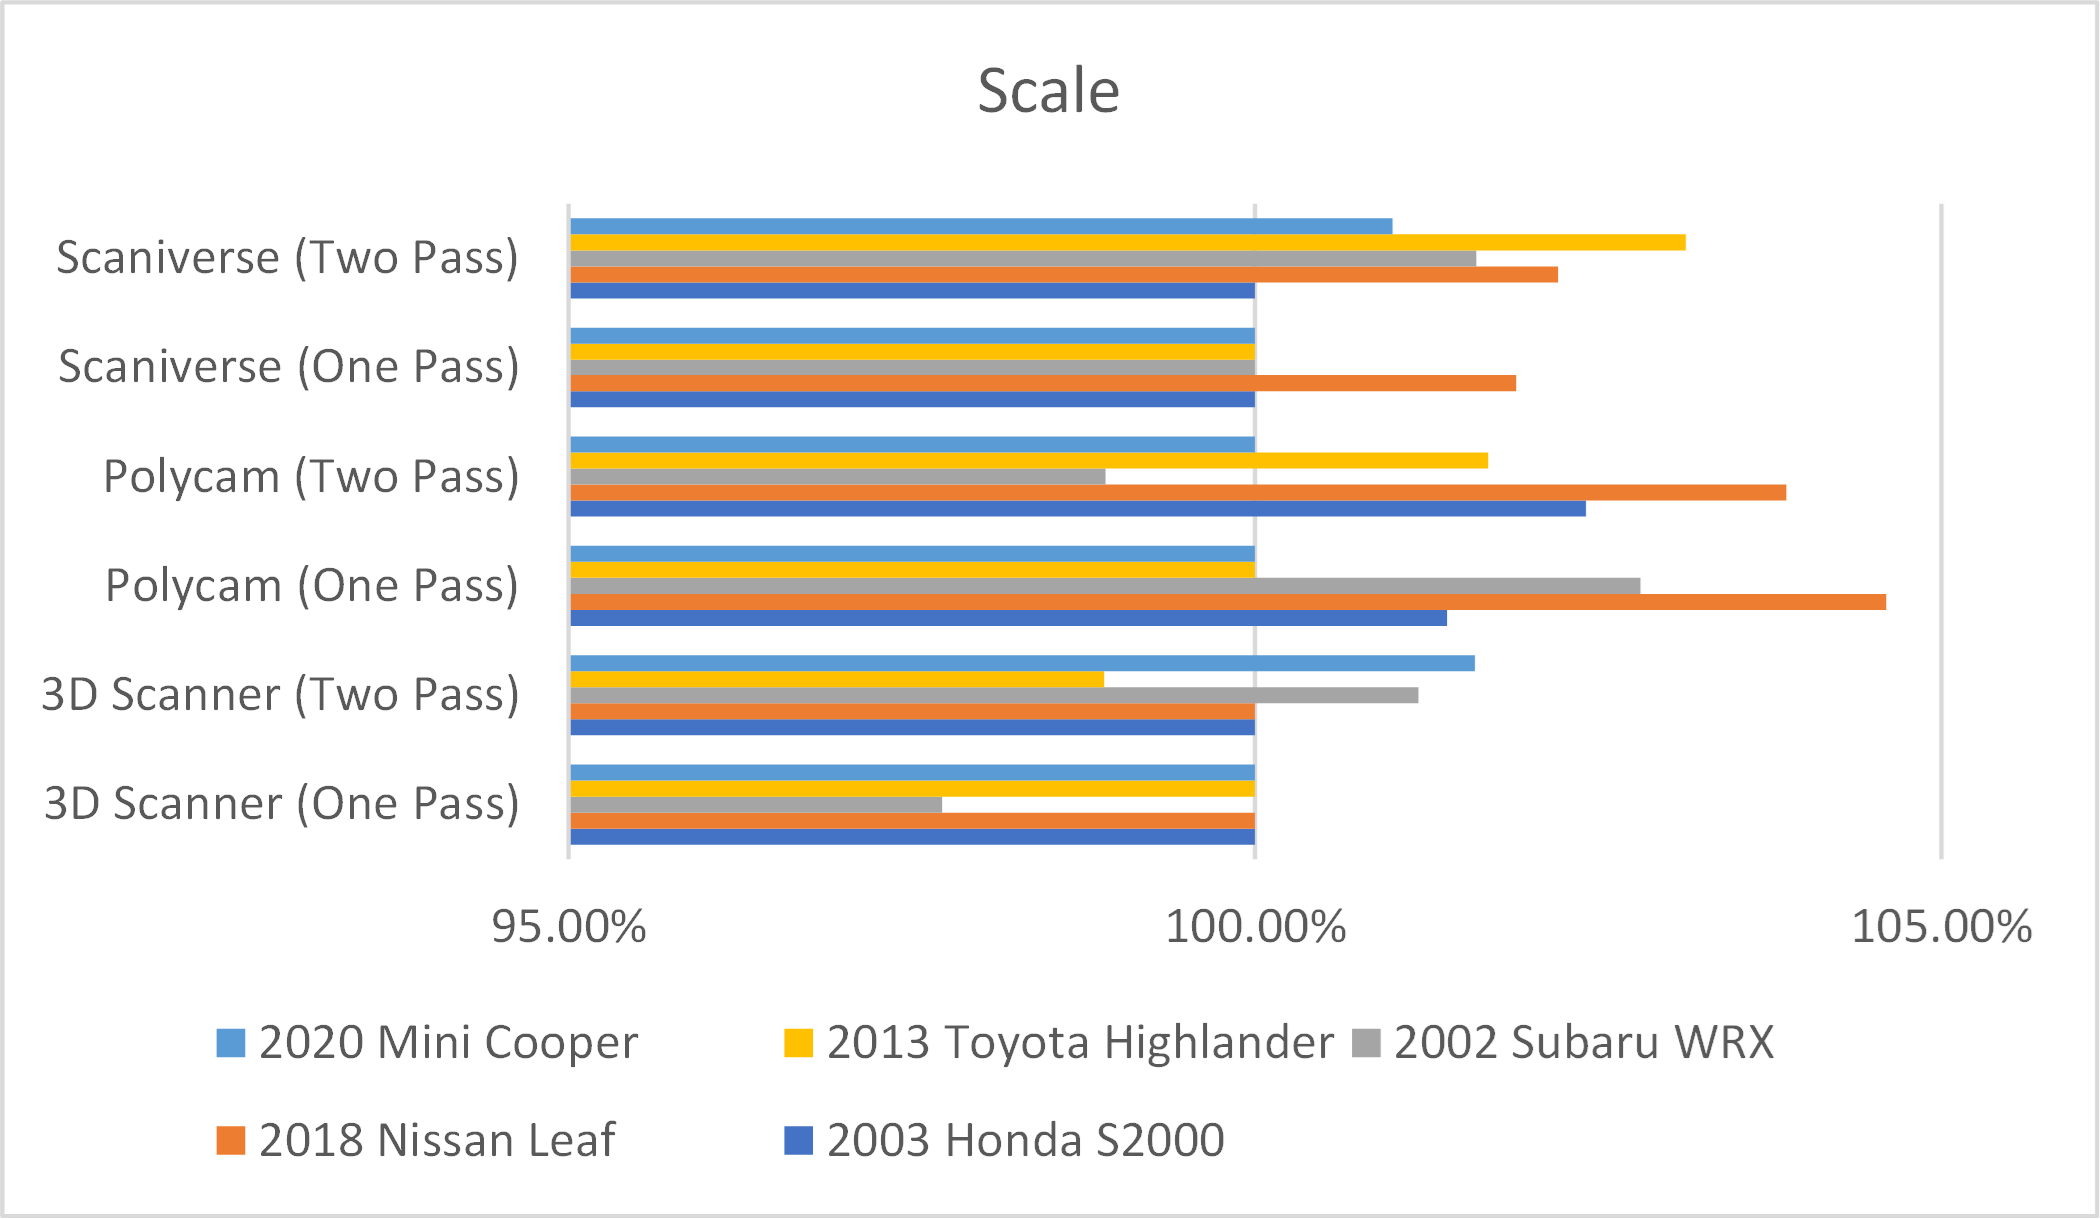 Figure 9 - A comparison chart of the percentage of scaling required per vehicle and per app.